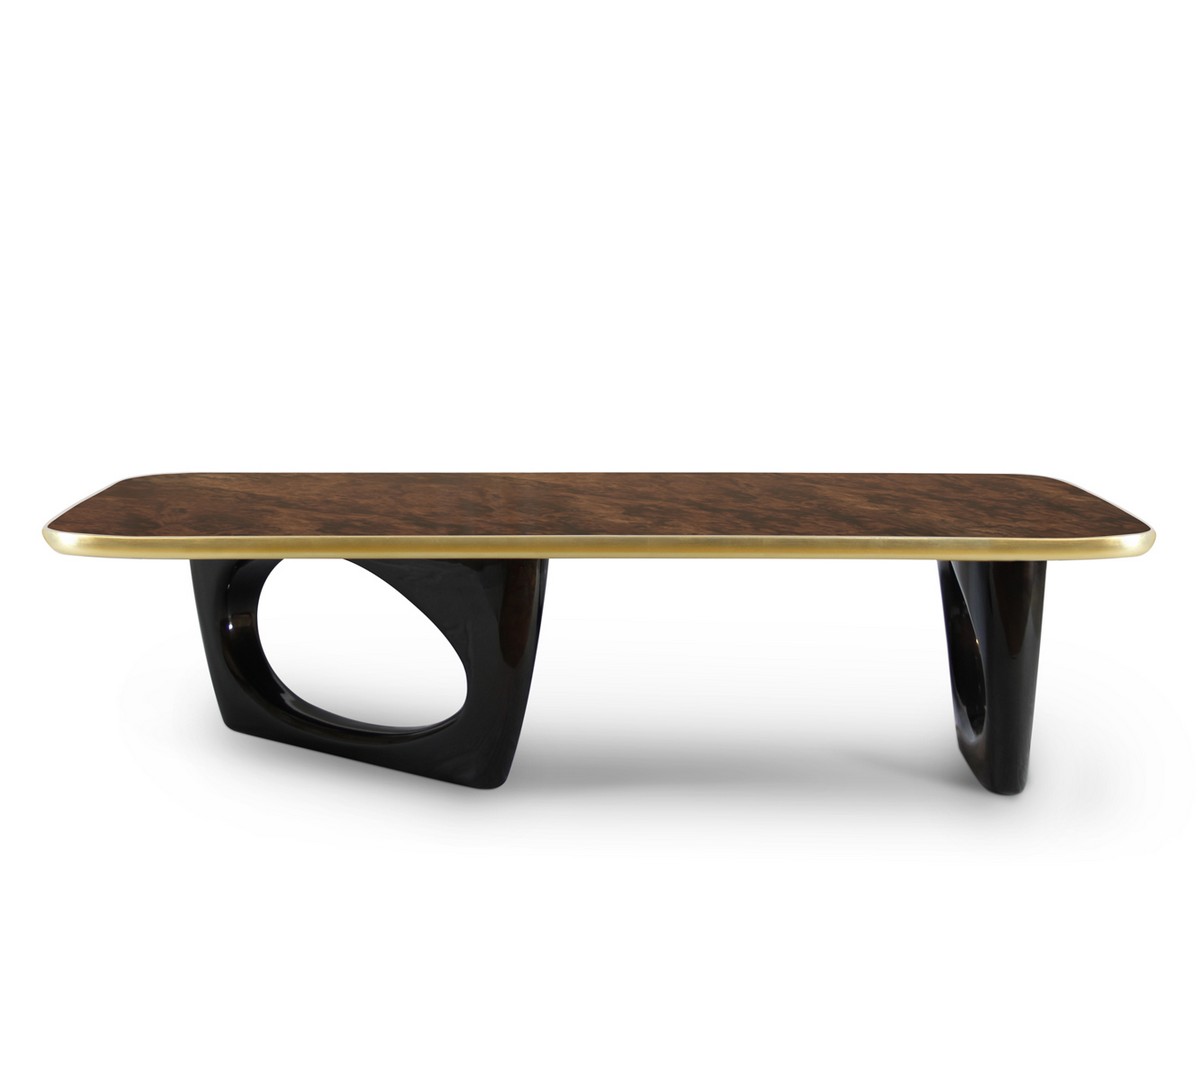 Minimalist Center Tables For Luxurious Living Room Ambiances